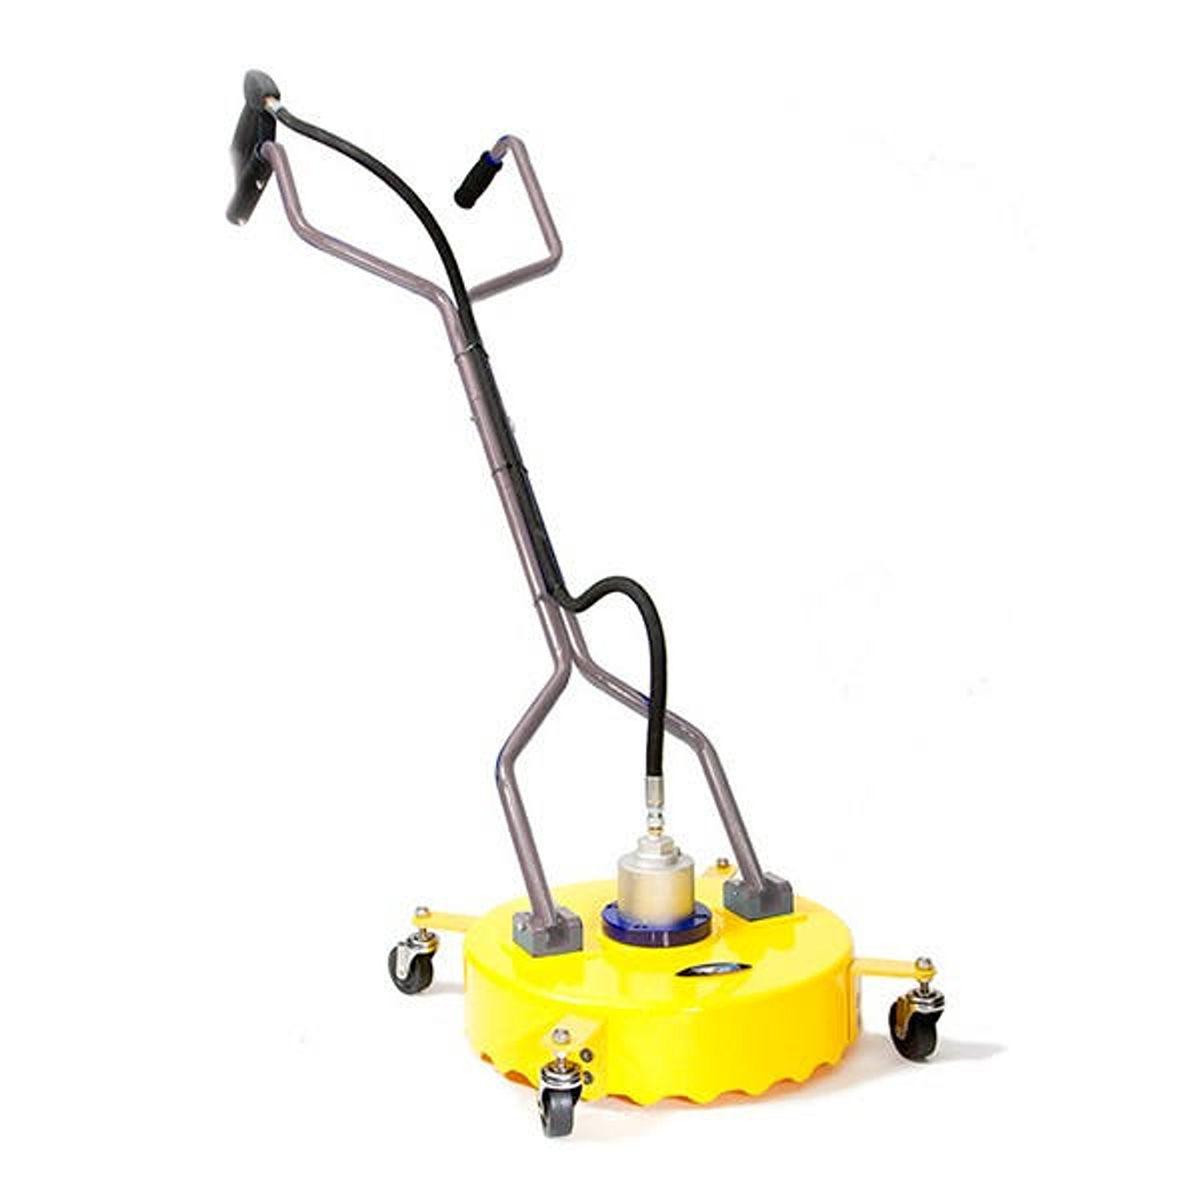 BE-85.403.005-Pressure-Whirlaway-18-inch-Rotary-Surface-Cleaner